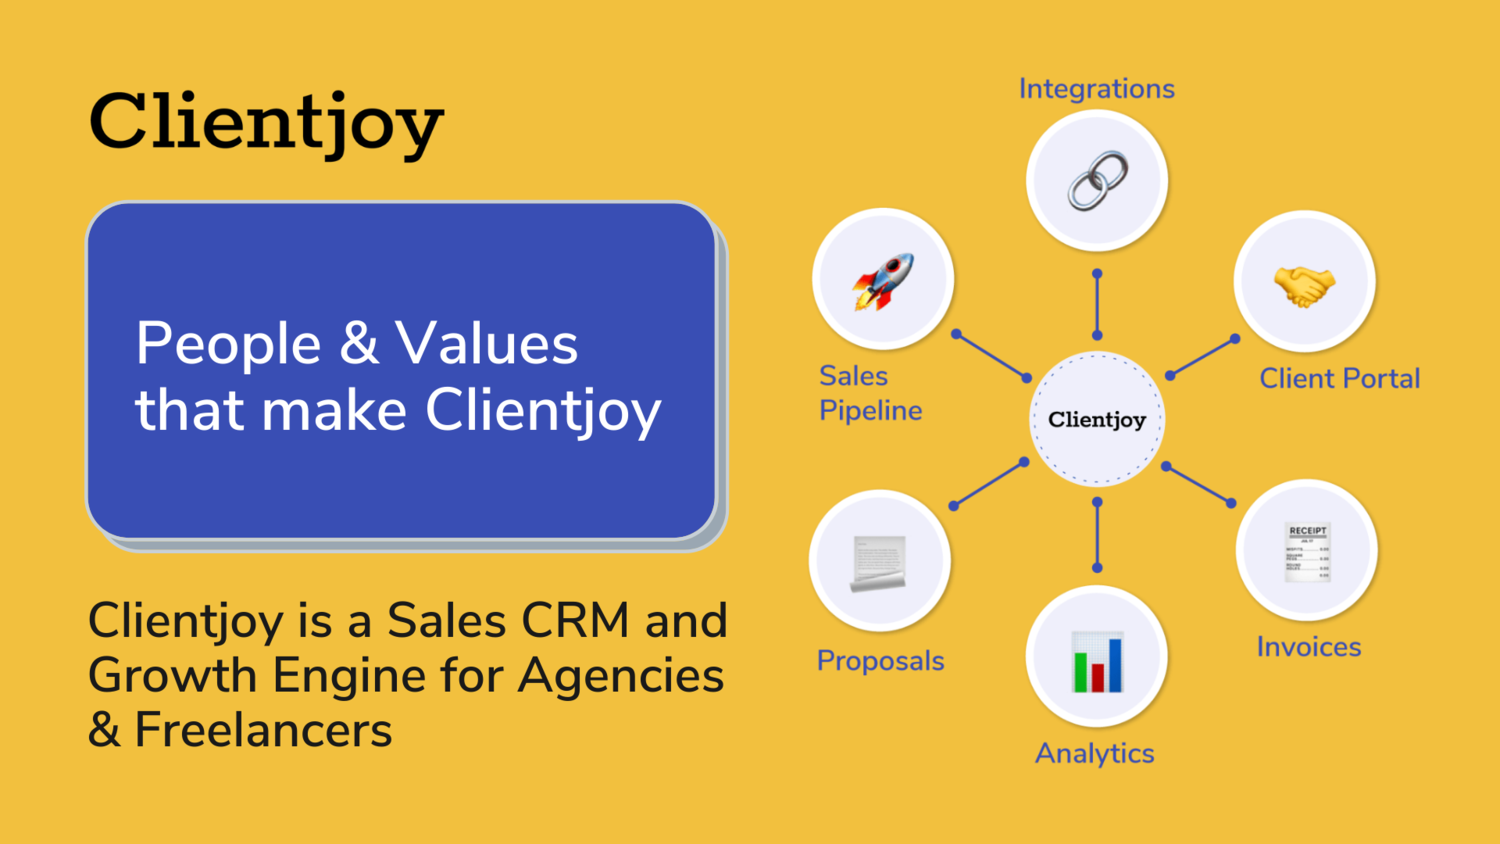 clientjoy crm | on a mission to help 100k agencies grow